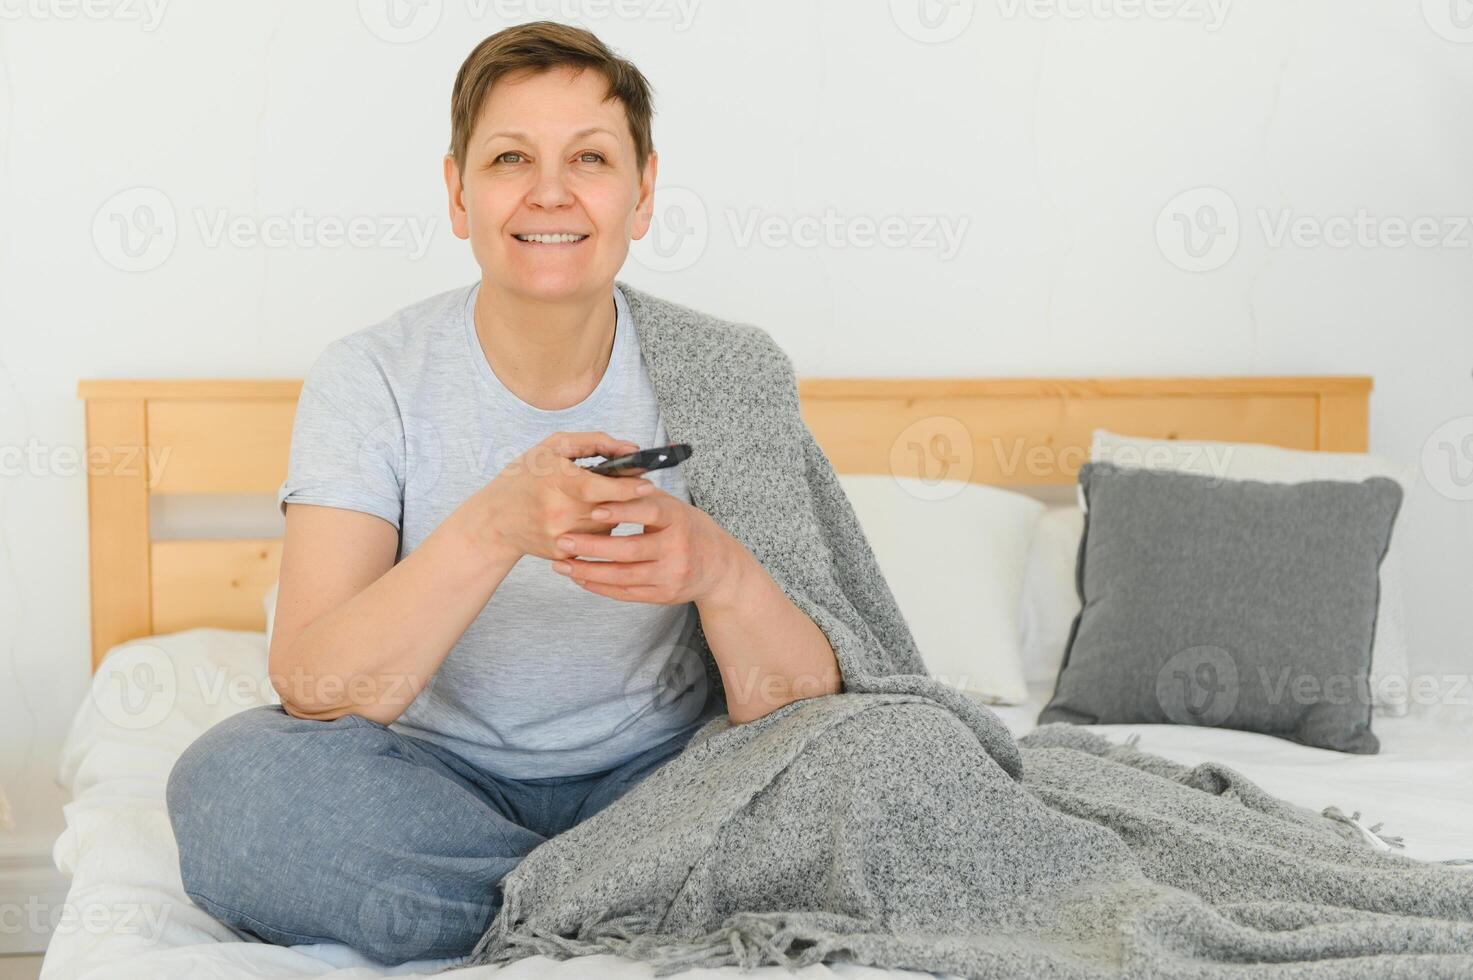 middle-aged woman sitting on the sofa and turning on the TV with a remote control. photo